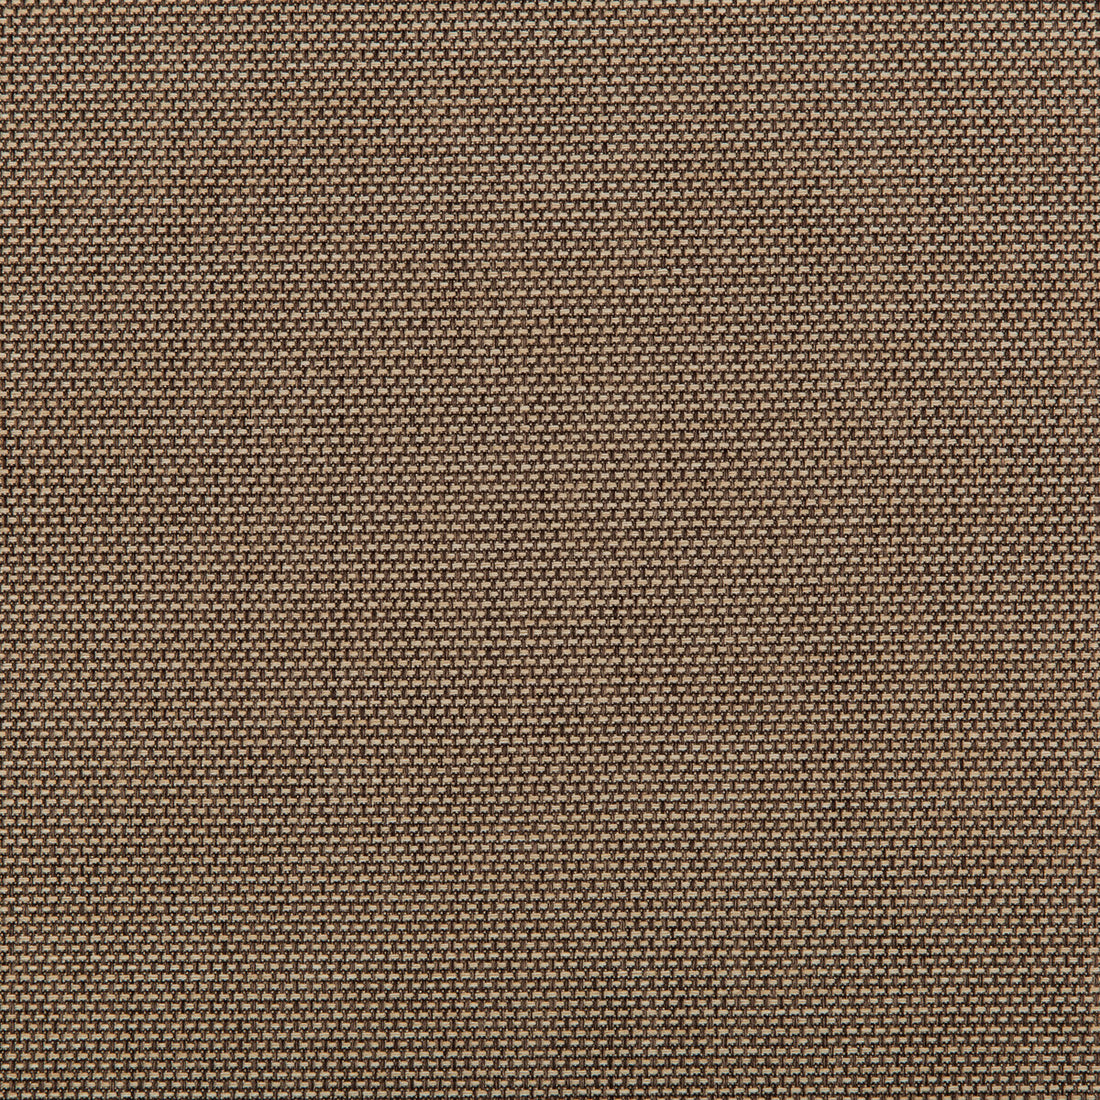 Kravet Contract fabric in 4645-106 color - pattern 4645.106.0 - by Kravet Contract